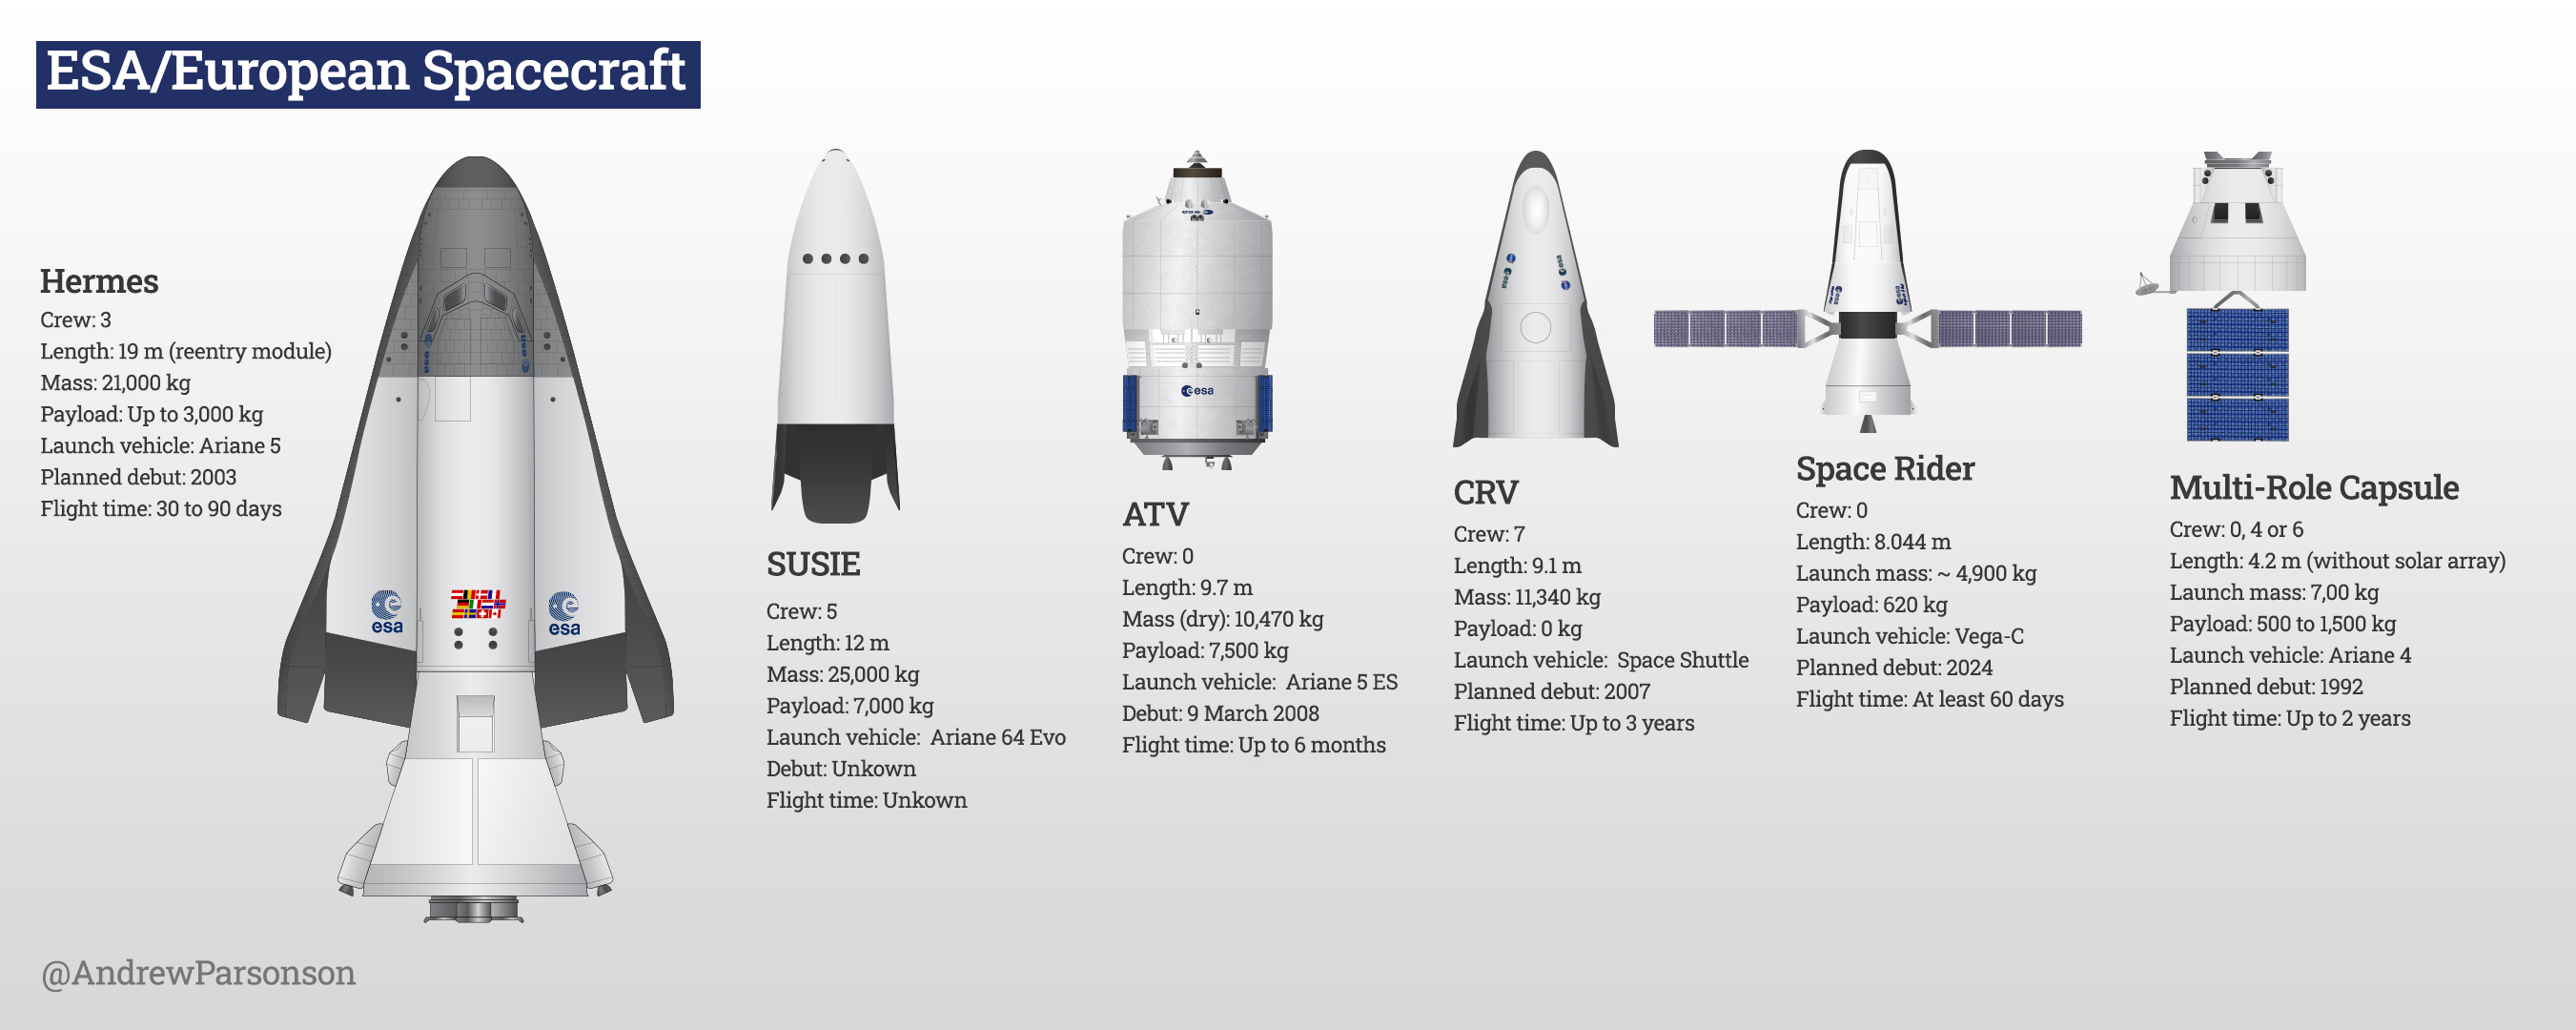 Andrew Parsonson on X: "My ESA/European spacecraft comparison got 2 new additions. @ArianeGroup's SUSIE is the proposed future of European crewed and cargo transport. And the Multi-Role Capsule was the UK's longshot